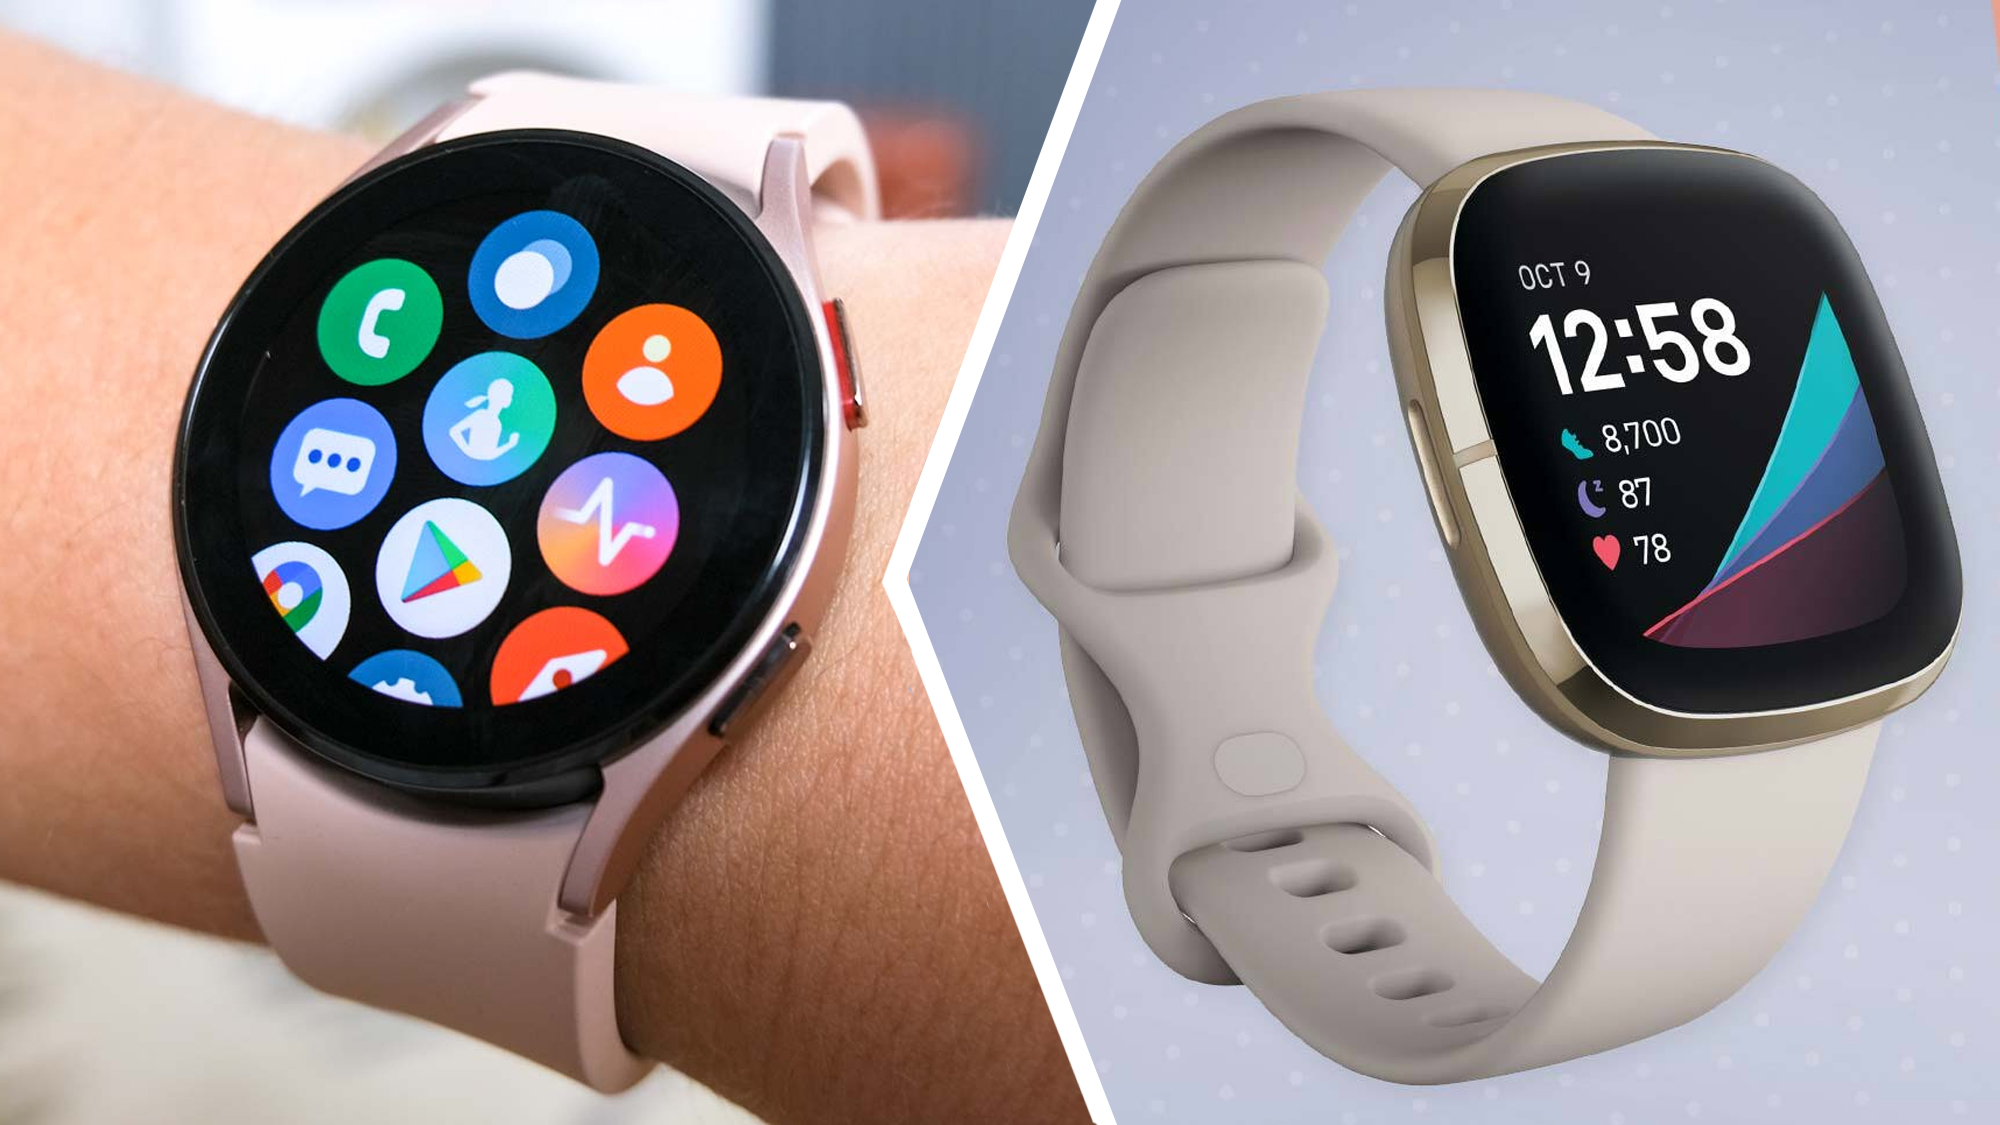 Towing Unity Awareness Samsung Galaxy Watch 4 vs Fitbit Sense: Which should you buy? | Tom's Guide